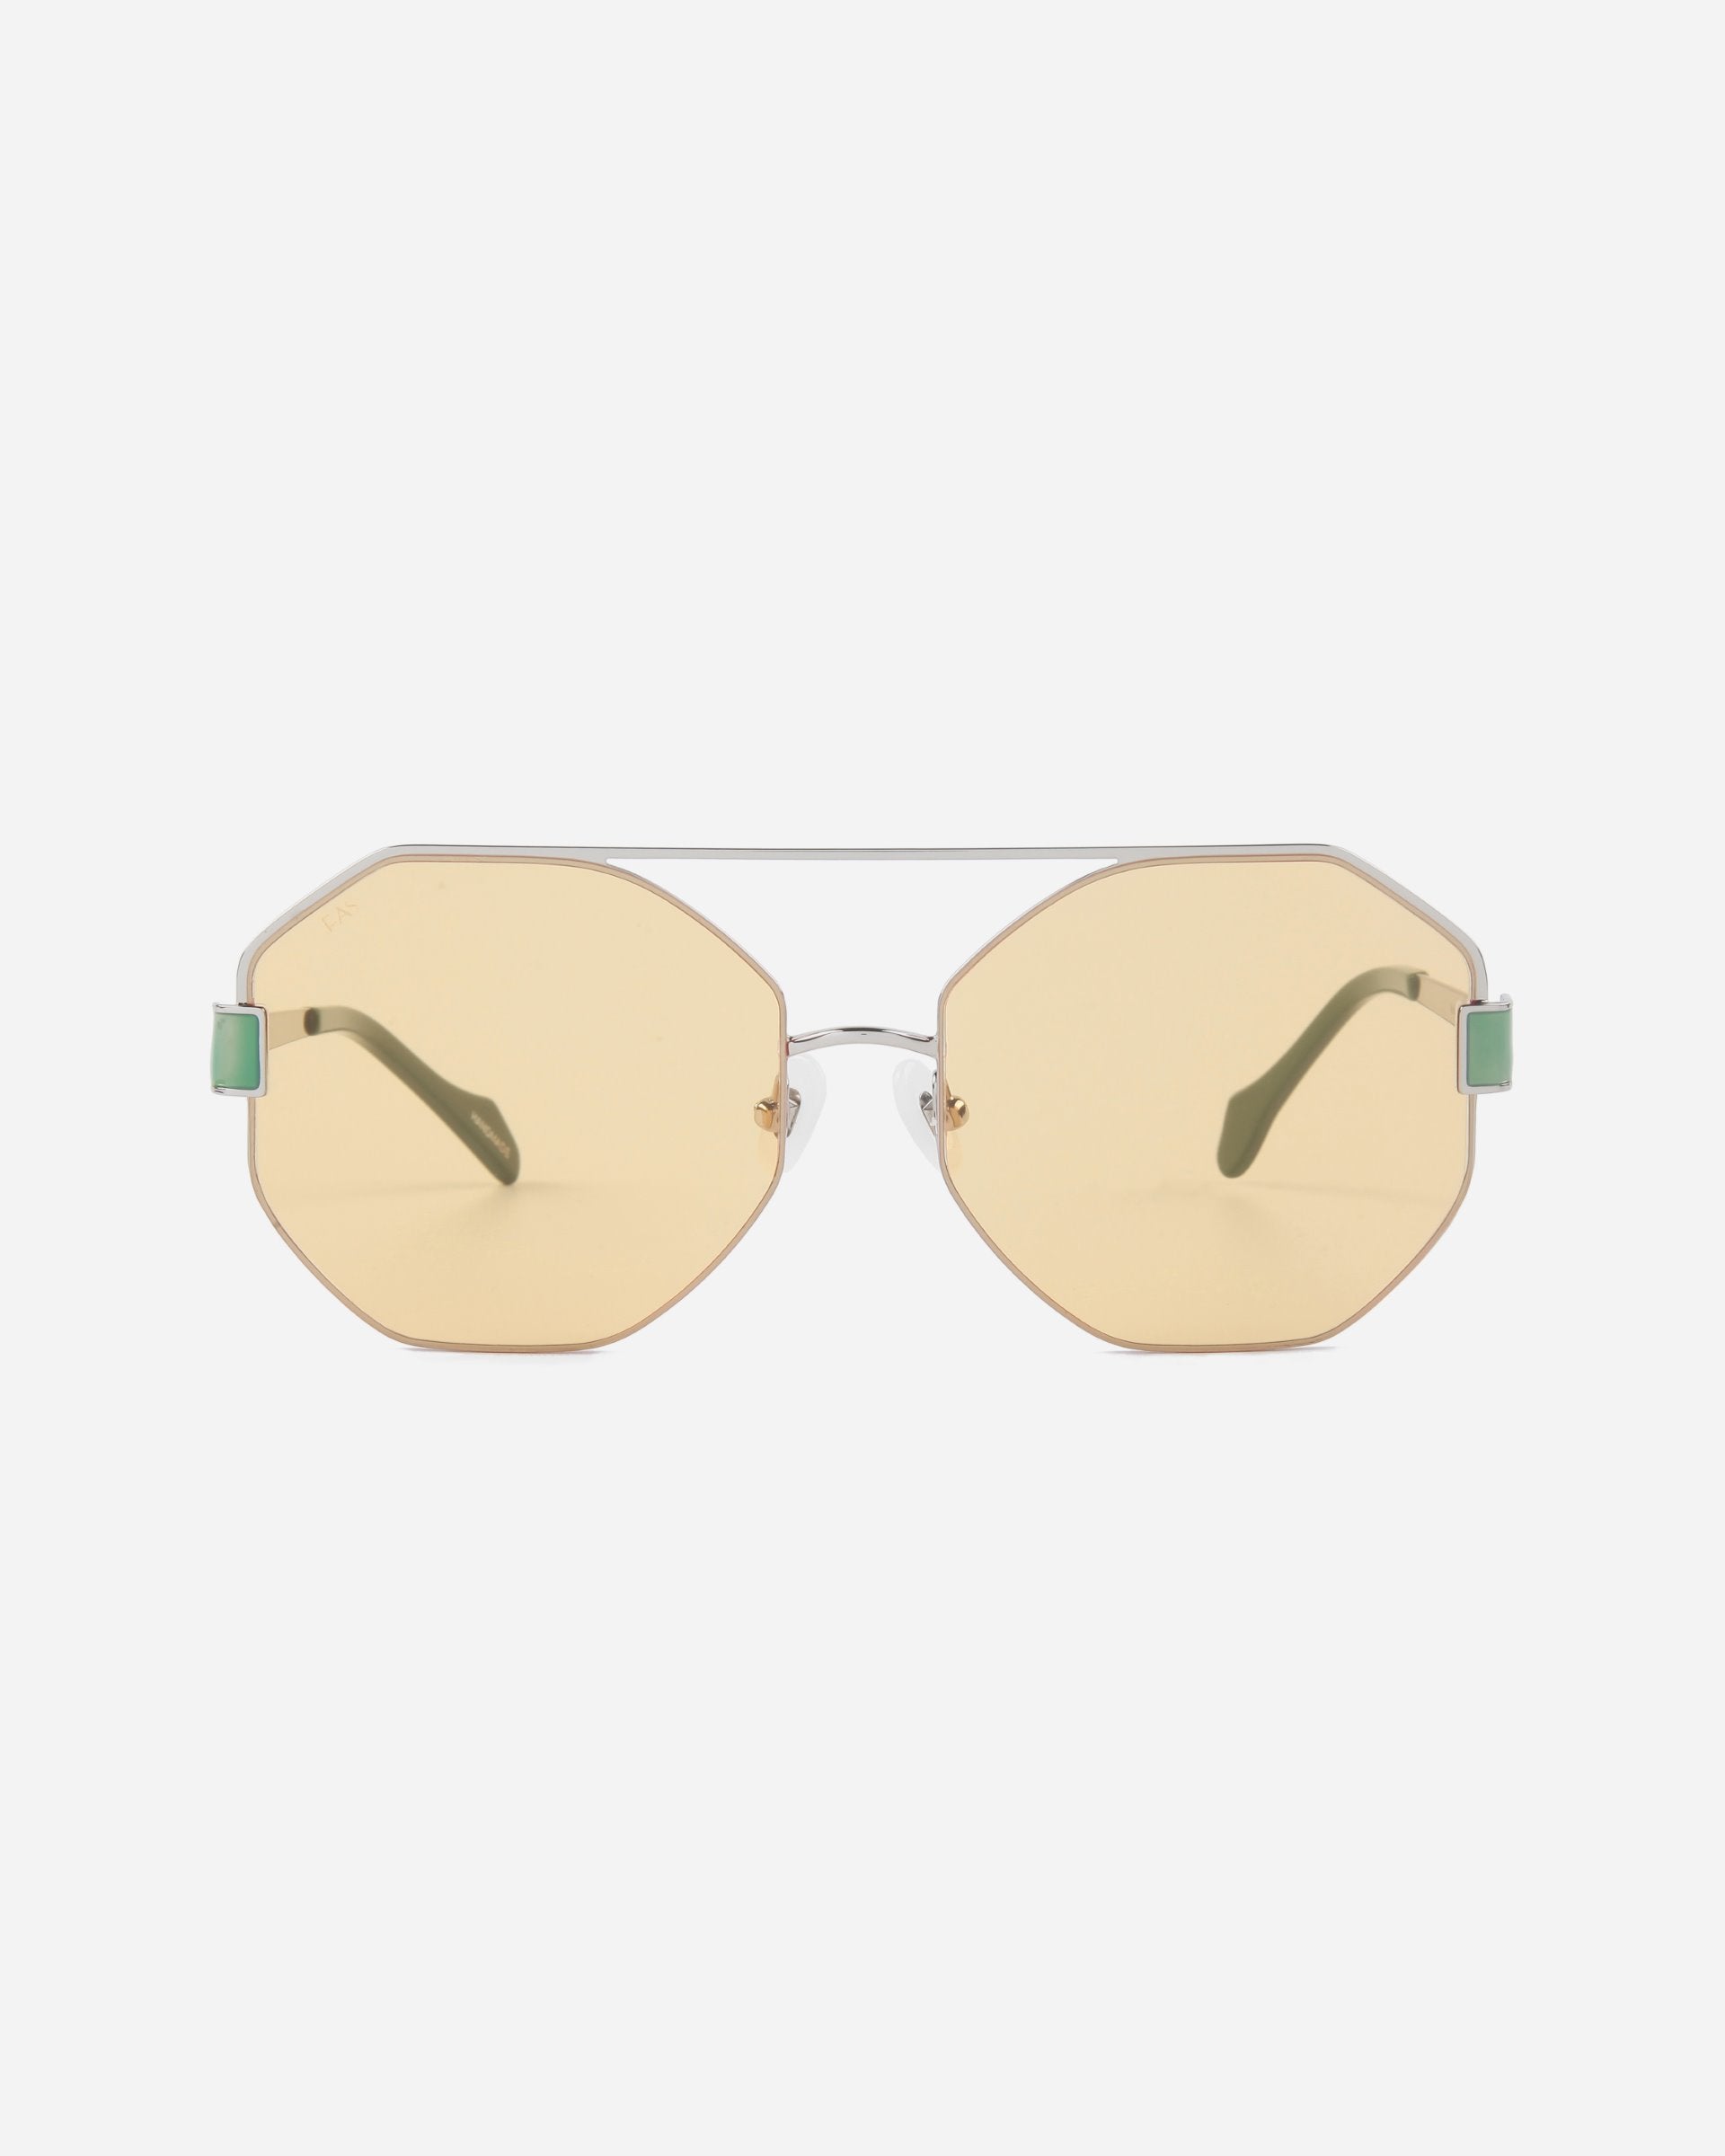 Hexagonal sunglasses with light yellow Nylon lenses and silver stainless steel frames. The Mania by For Art&#39;s Sake® sunglasses feature adjustable nosepads, green temple tips, and a minimalist design, set against a plain white background.